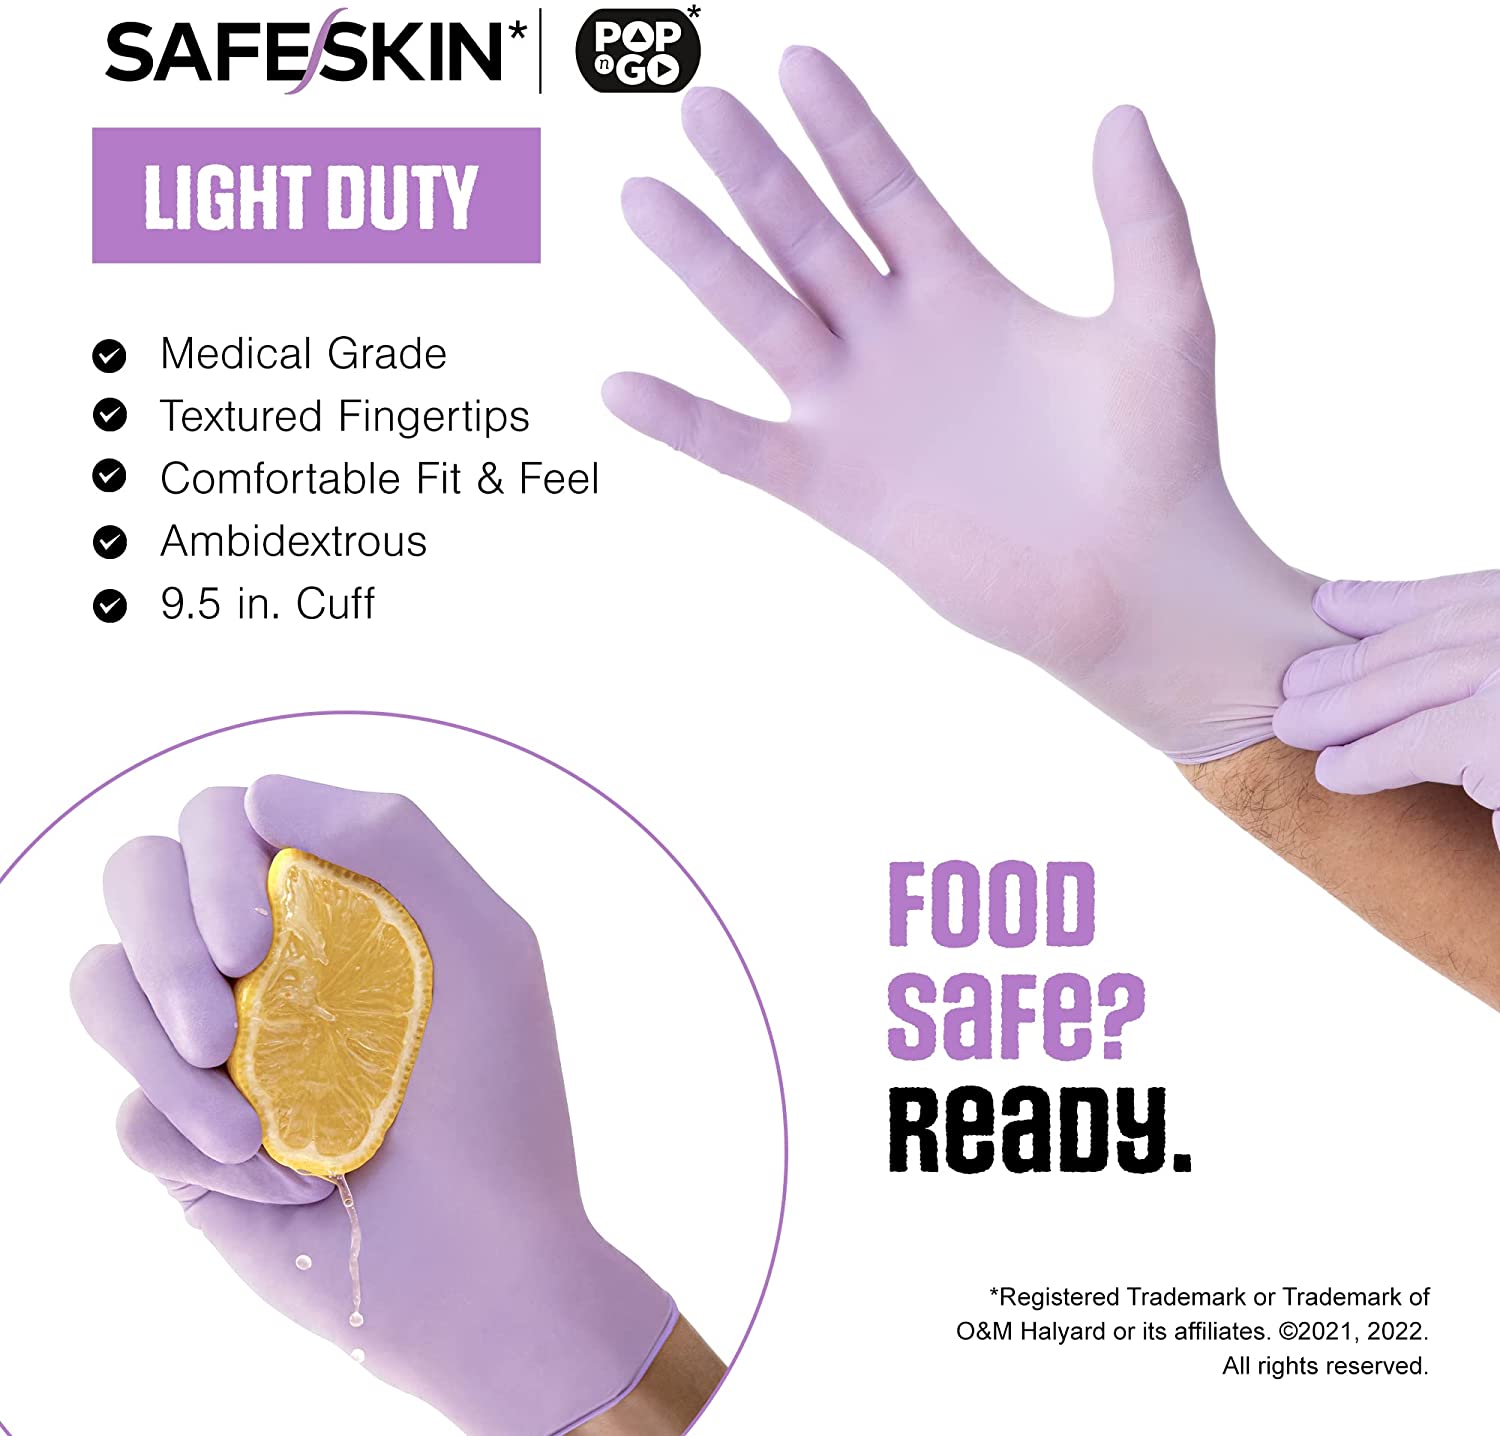 Wholesale SAFESKIN* Disposable Nitrile Gloves in POP-N-GO* Pack (50 or 200  Count), Light Duty, Powder-Free -Food Handling, Hair Color Medium (Pack of  50) Pack of 50 | Supply Leader — Wholesale Supply